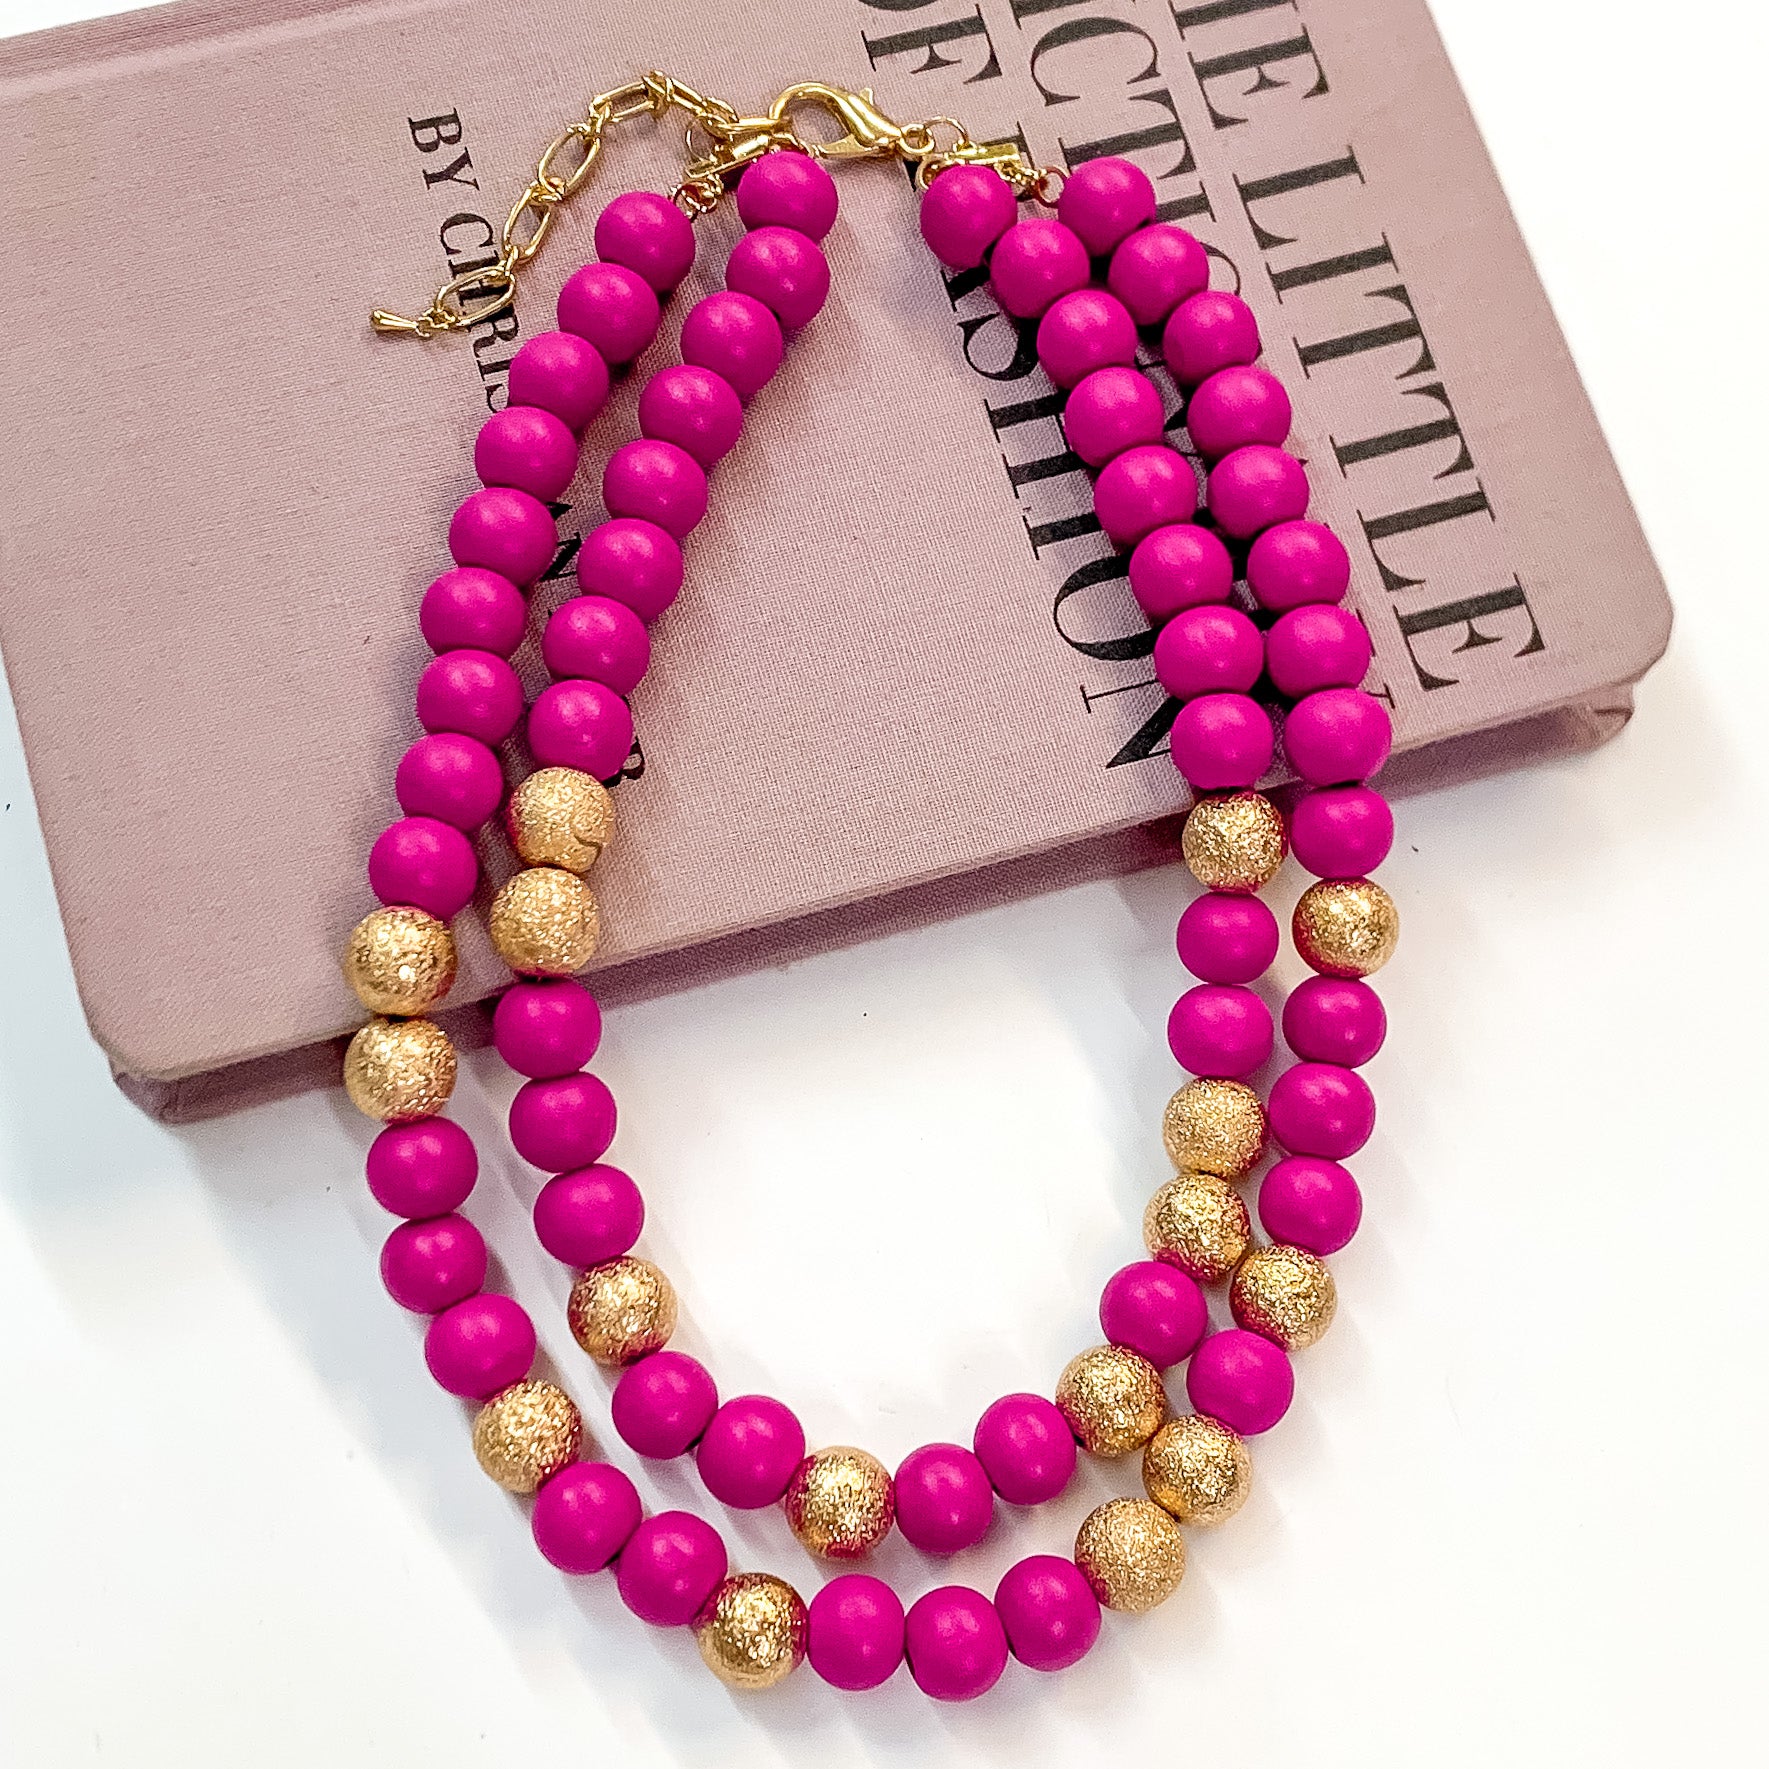 Pictured partially on a mauve colored book on a white background is a two strand fuchsia beaded necklace with gold beaded spacers and gold hardware. 